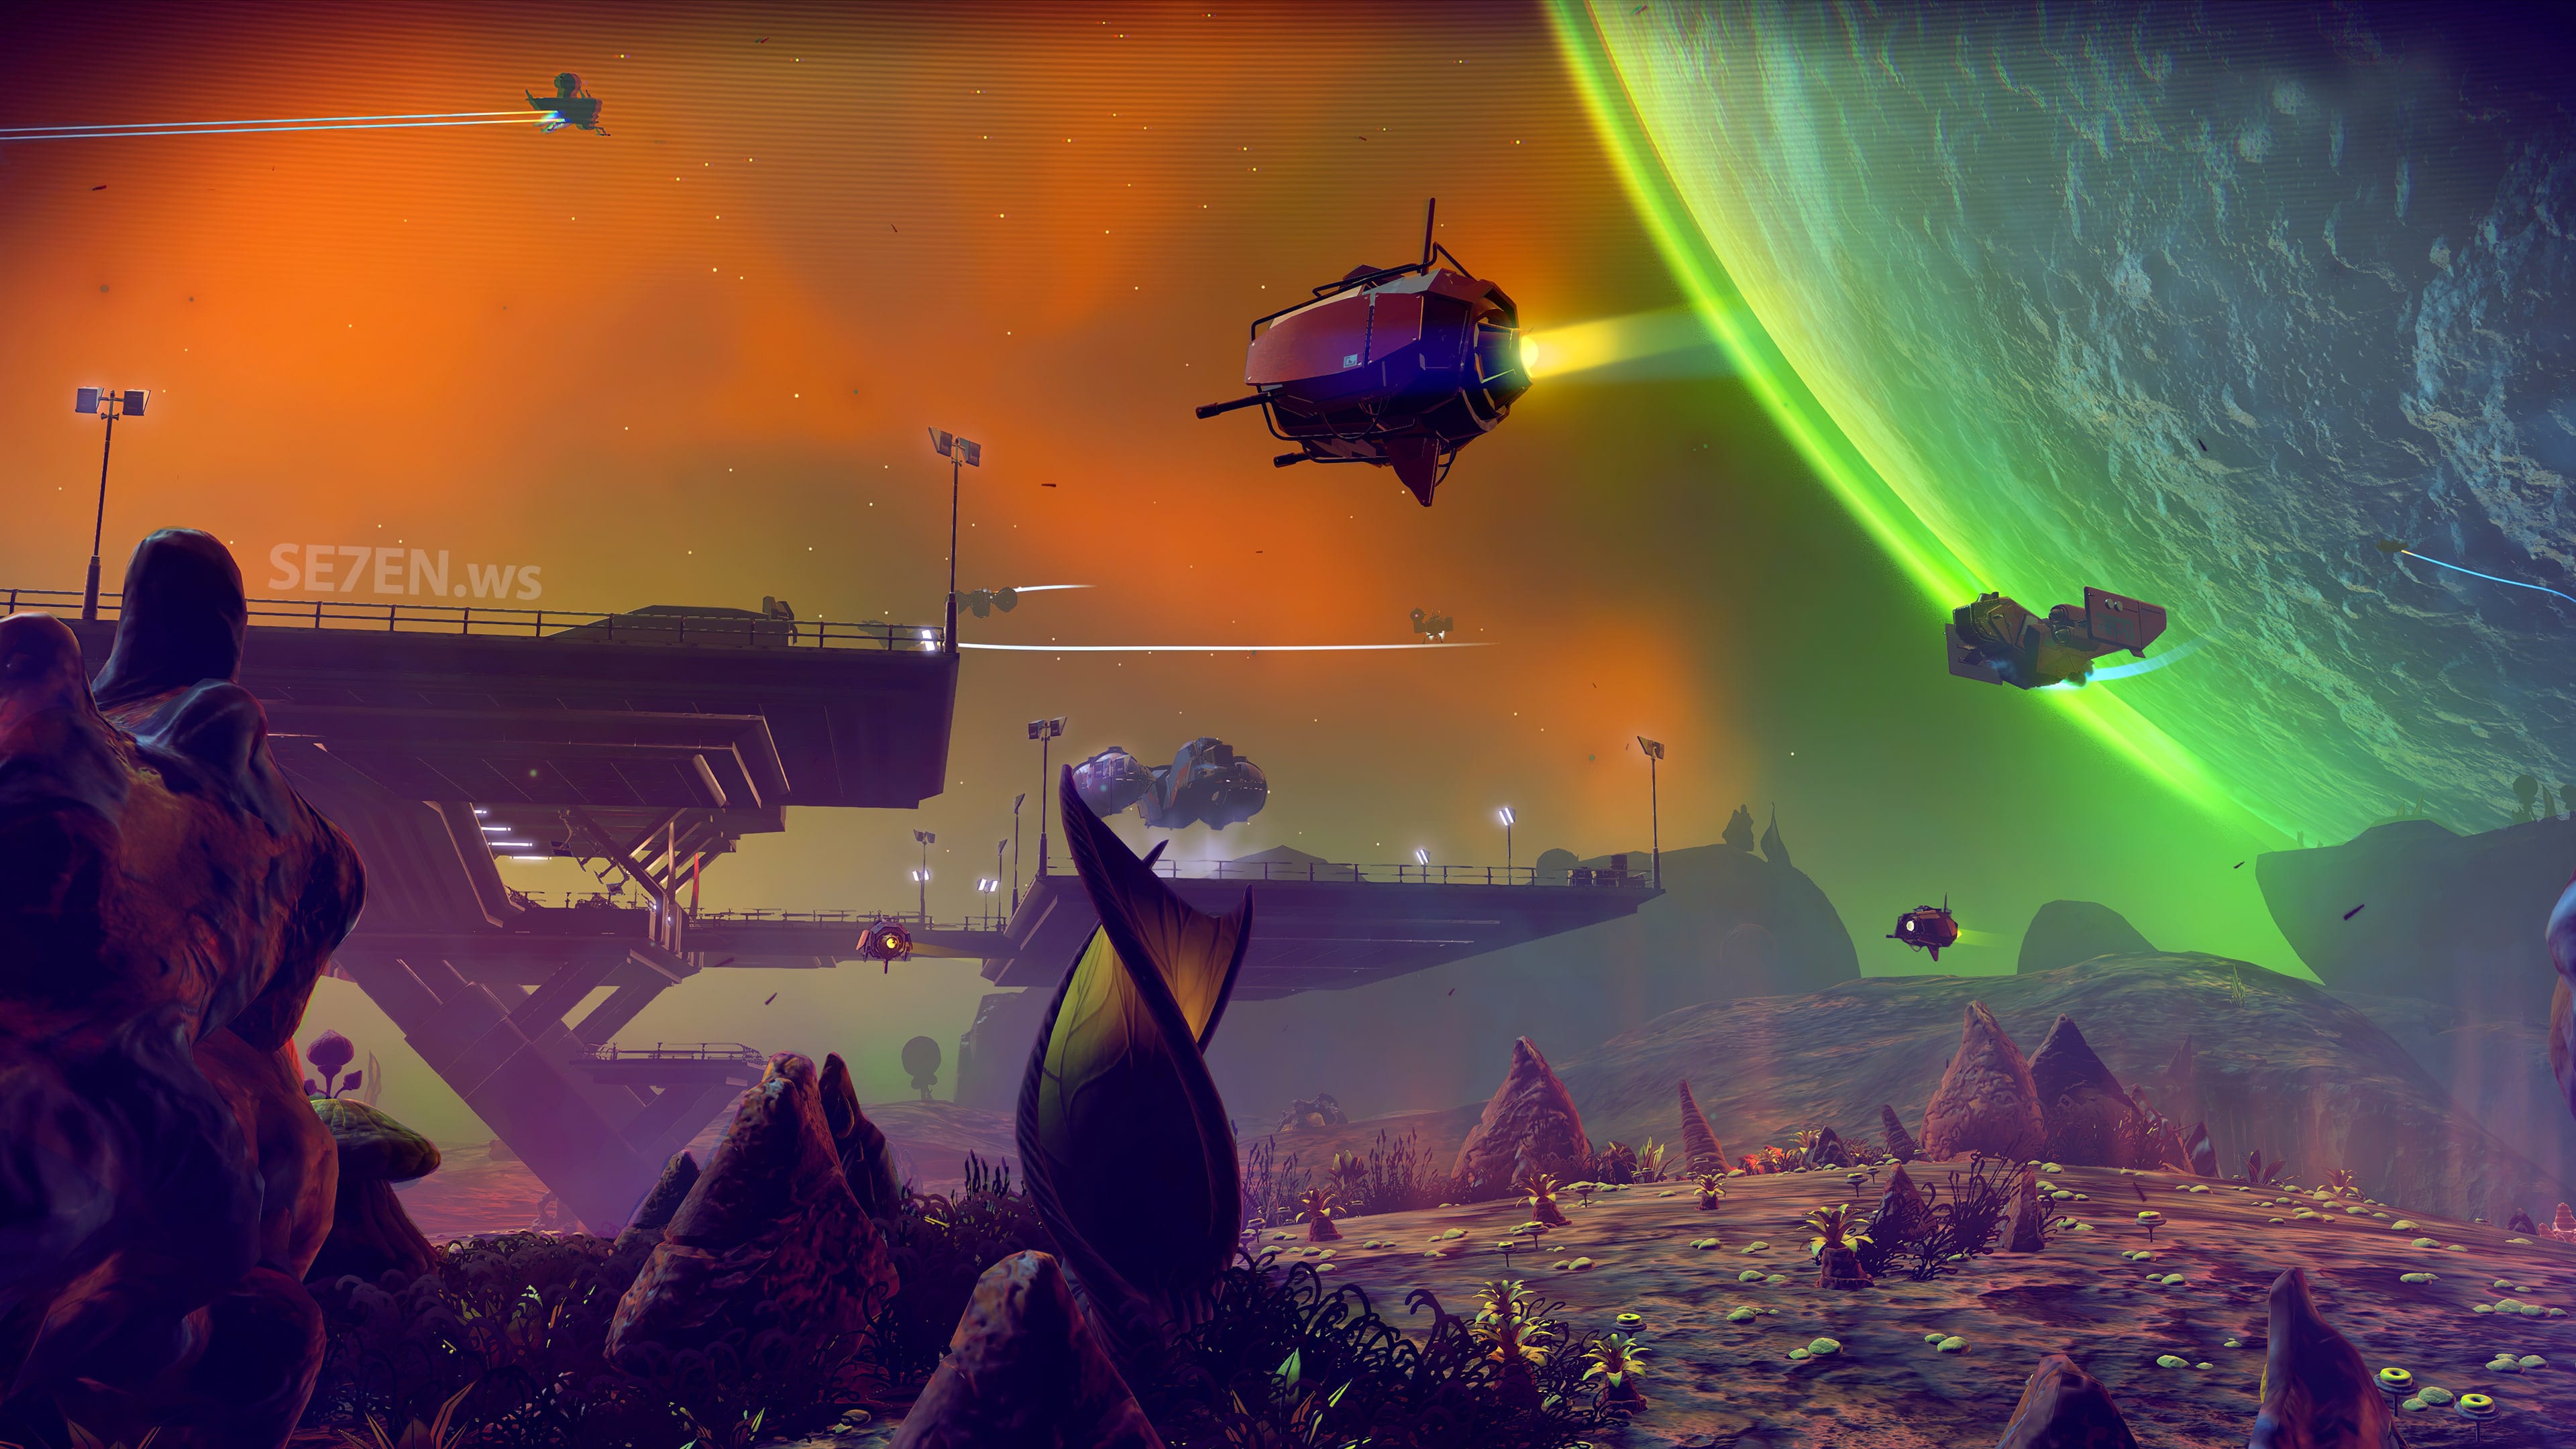 Download No Man’s Sky for free on PC (latest)